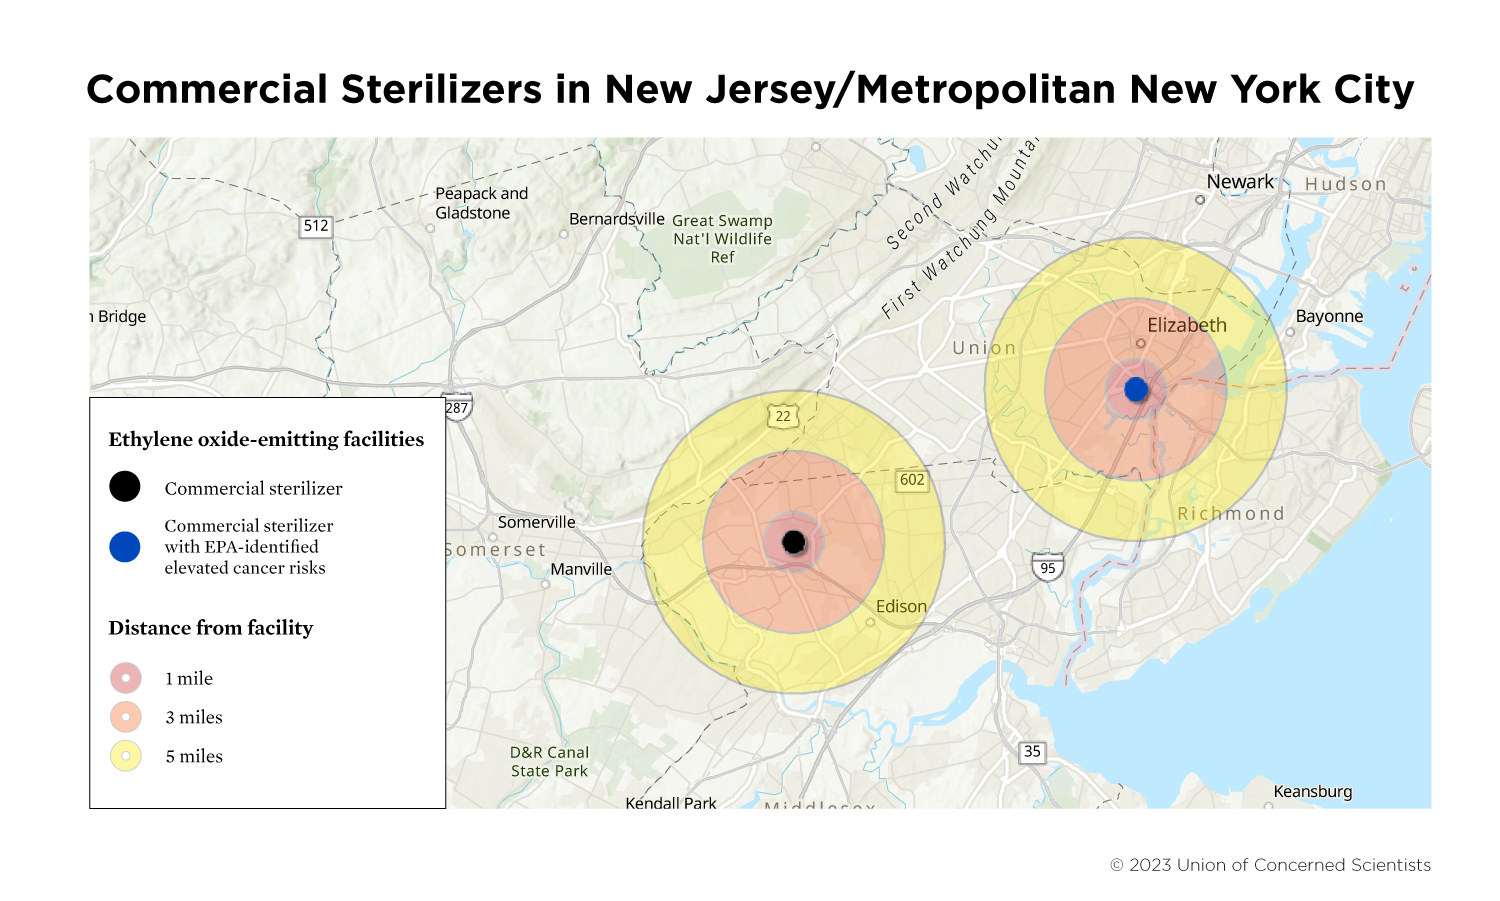 A map of ethylene oxide-emitting facilities in New Jersey/Metropolitan New York City